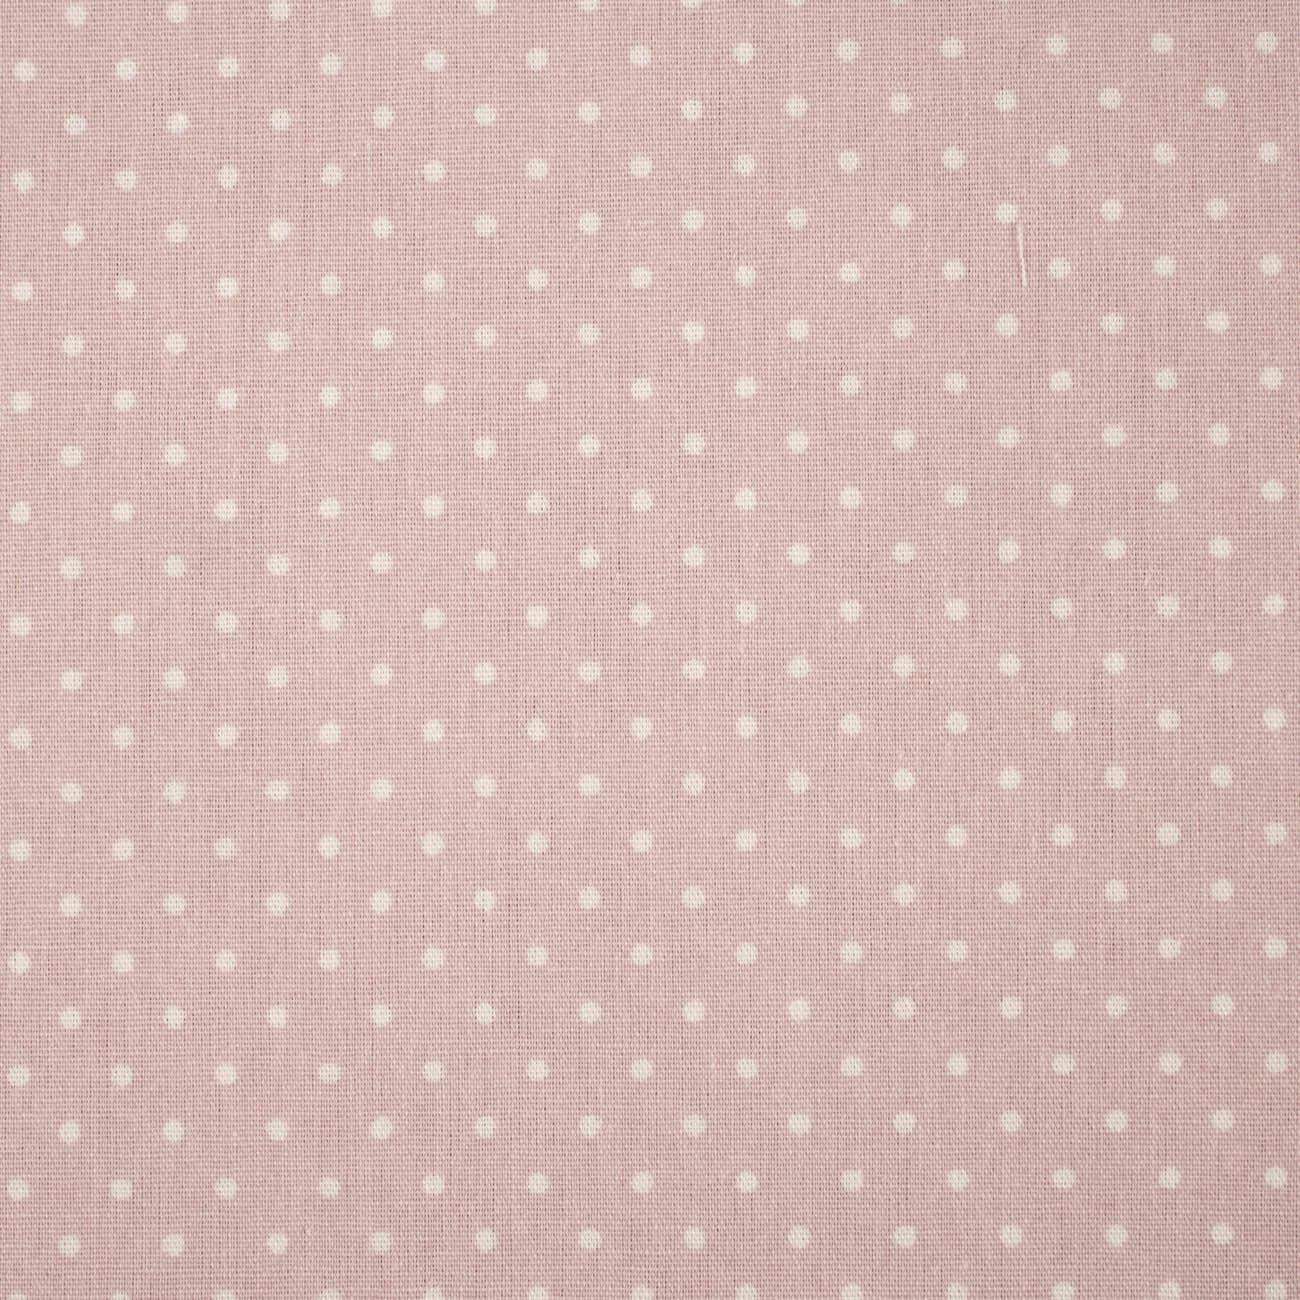 WHITE DOTS / DIRTY PINK - Cotton woven fabric